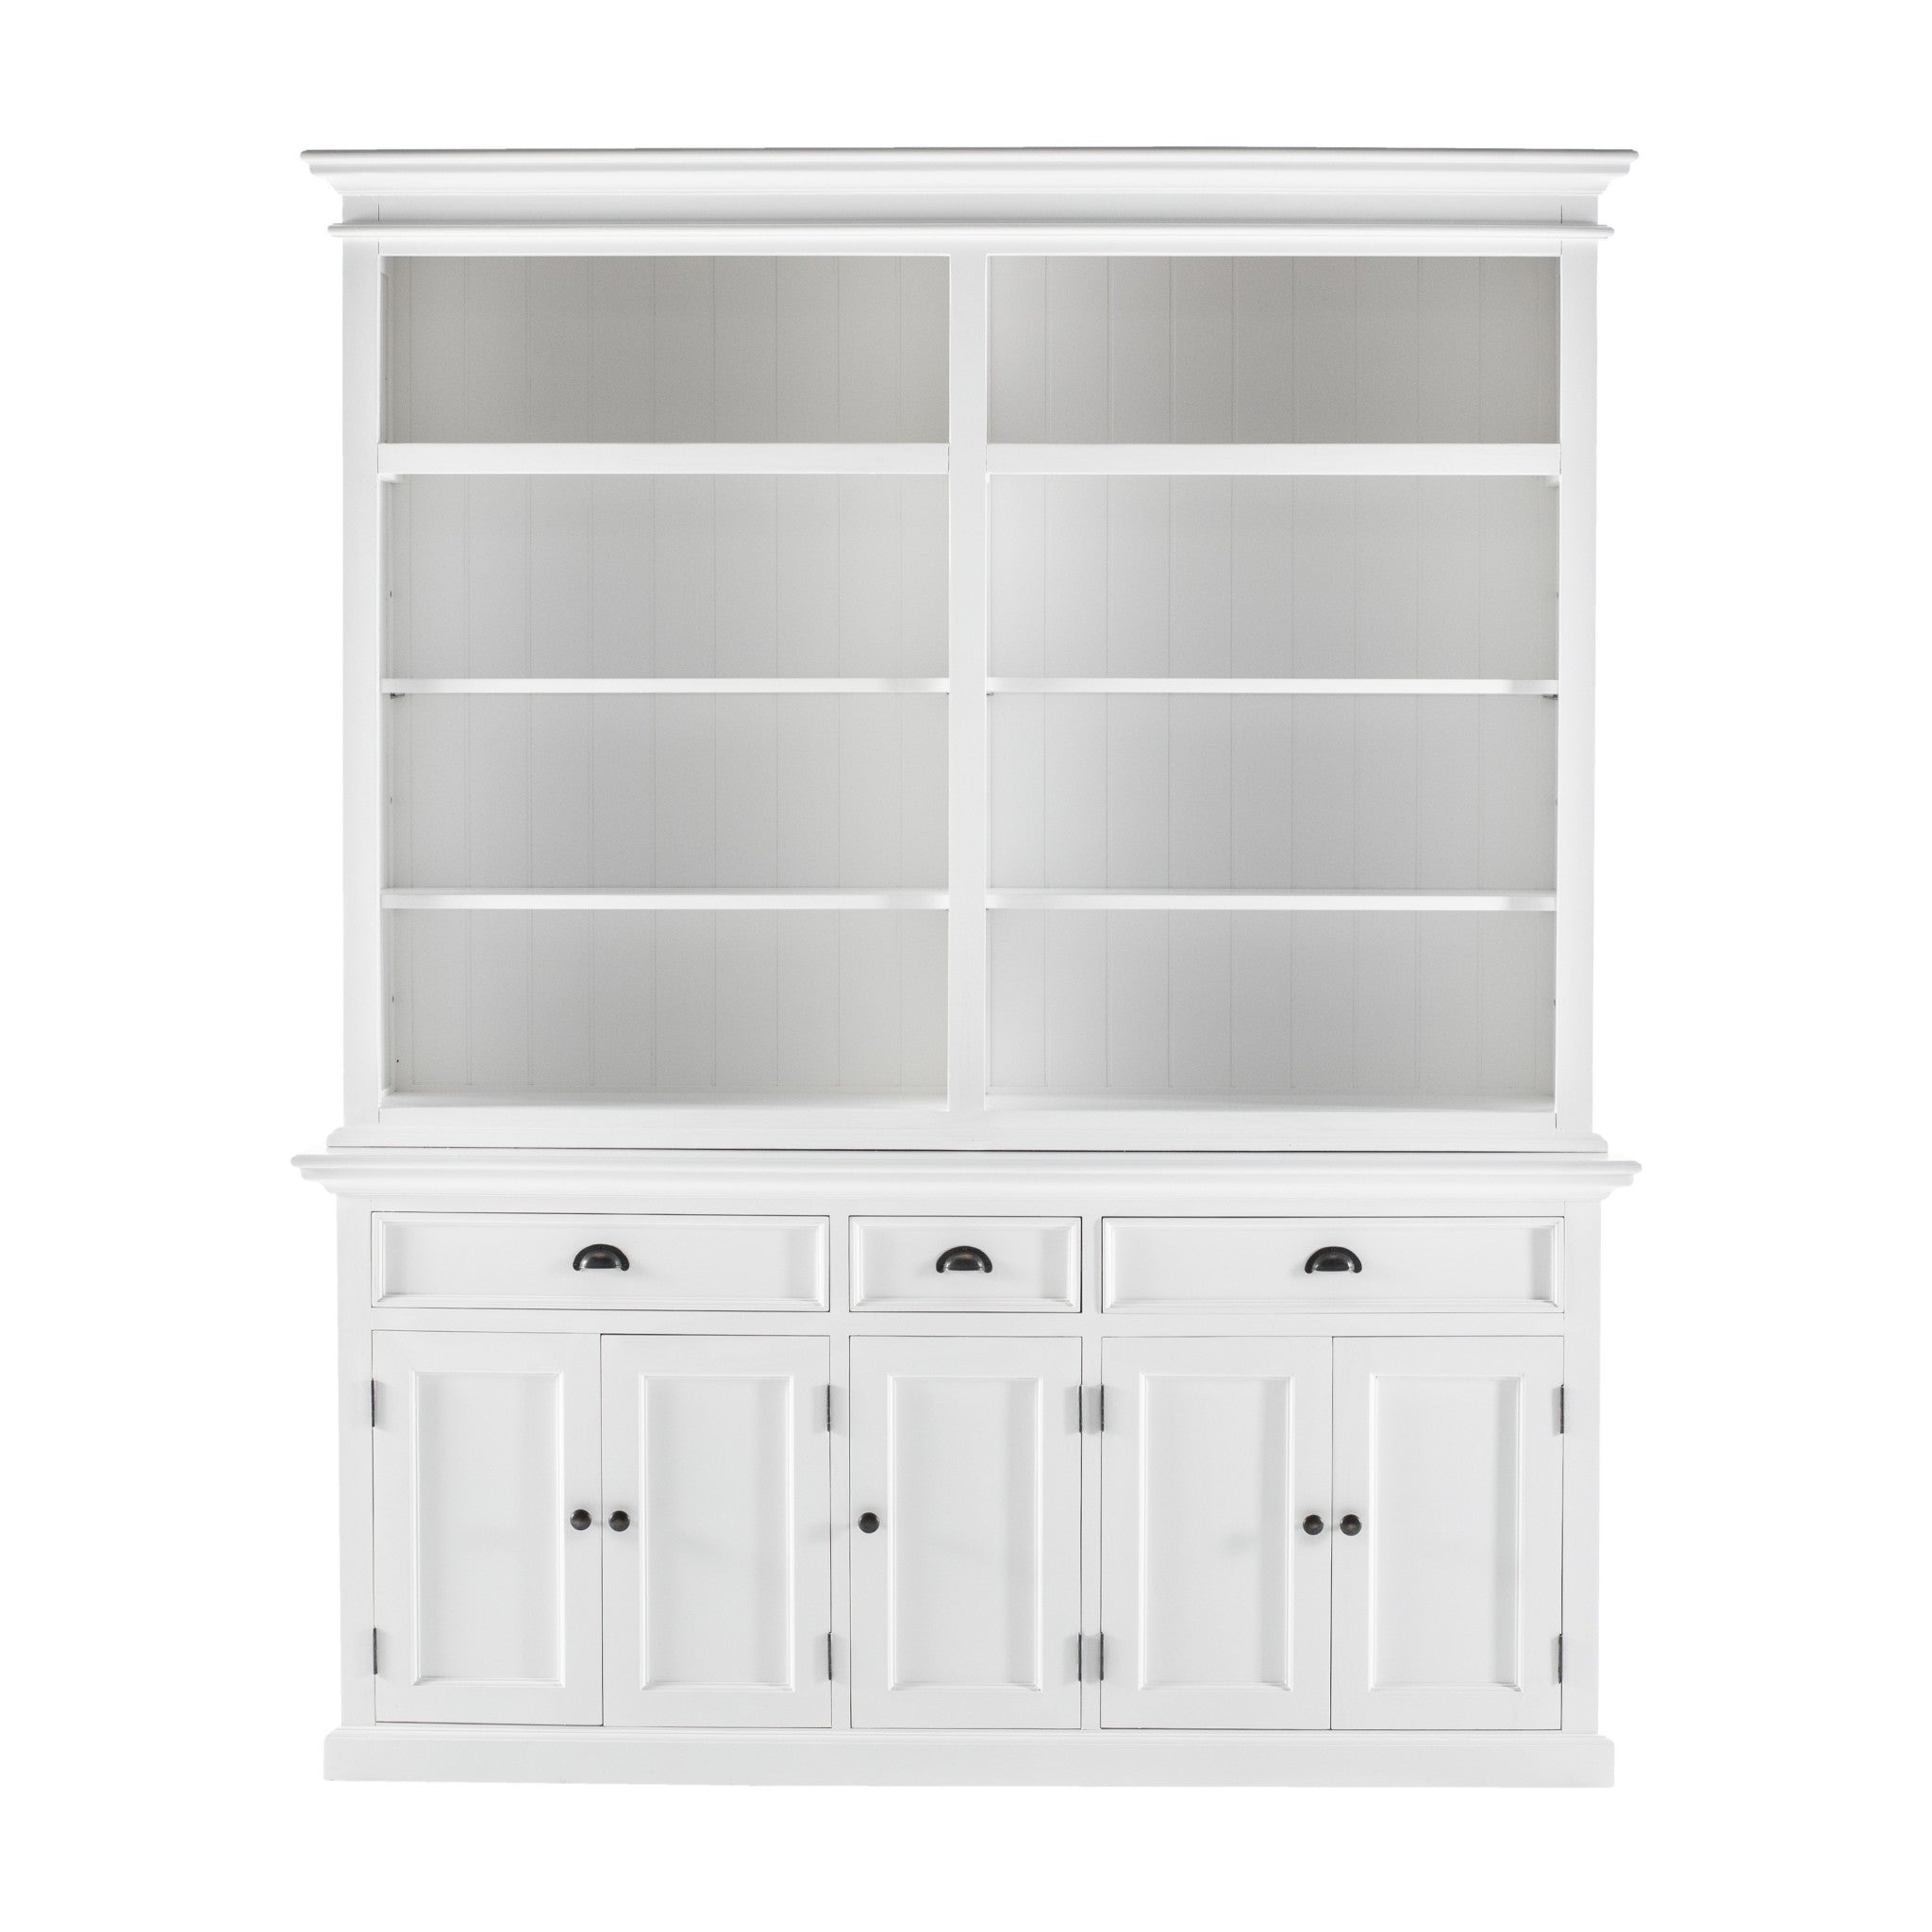 87" White Solid Wood Four Tier Bookcase